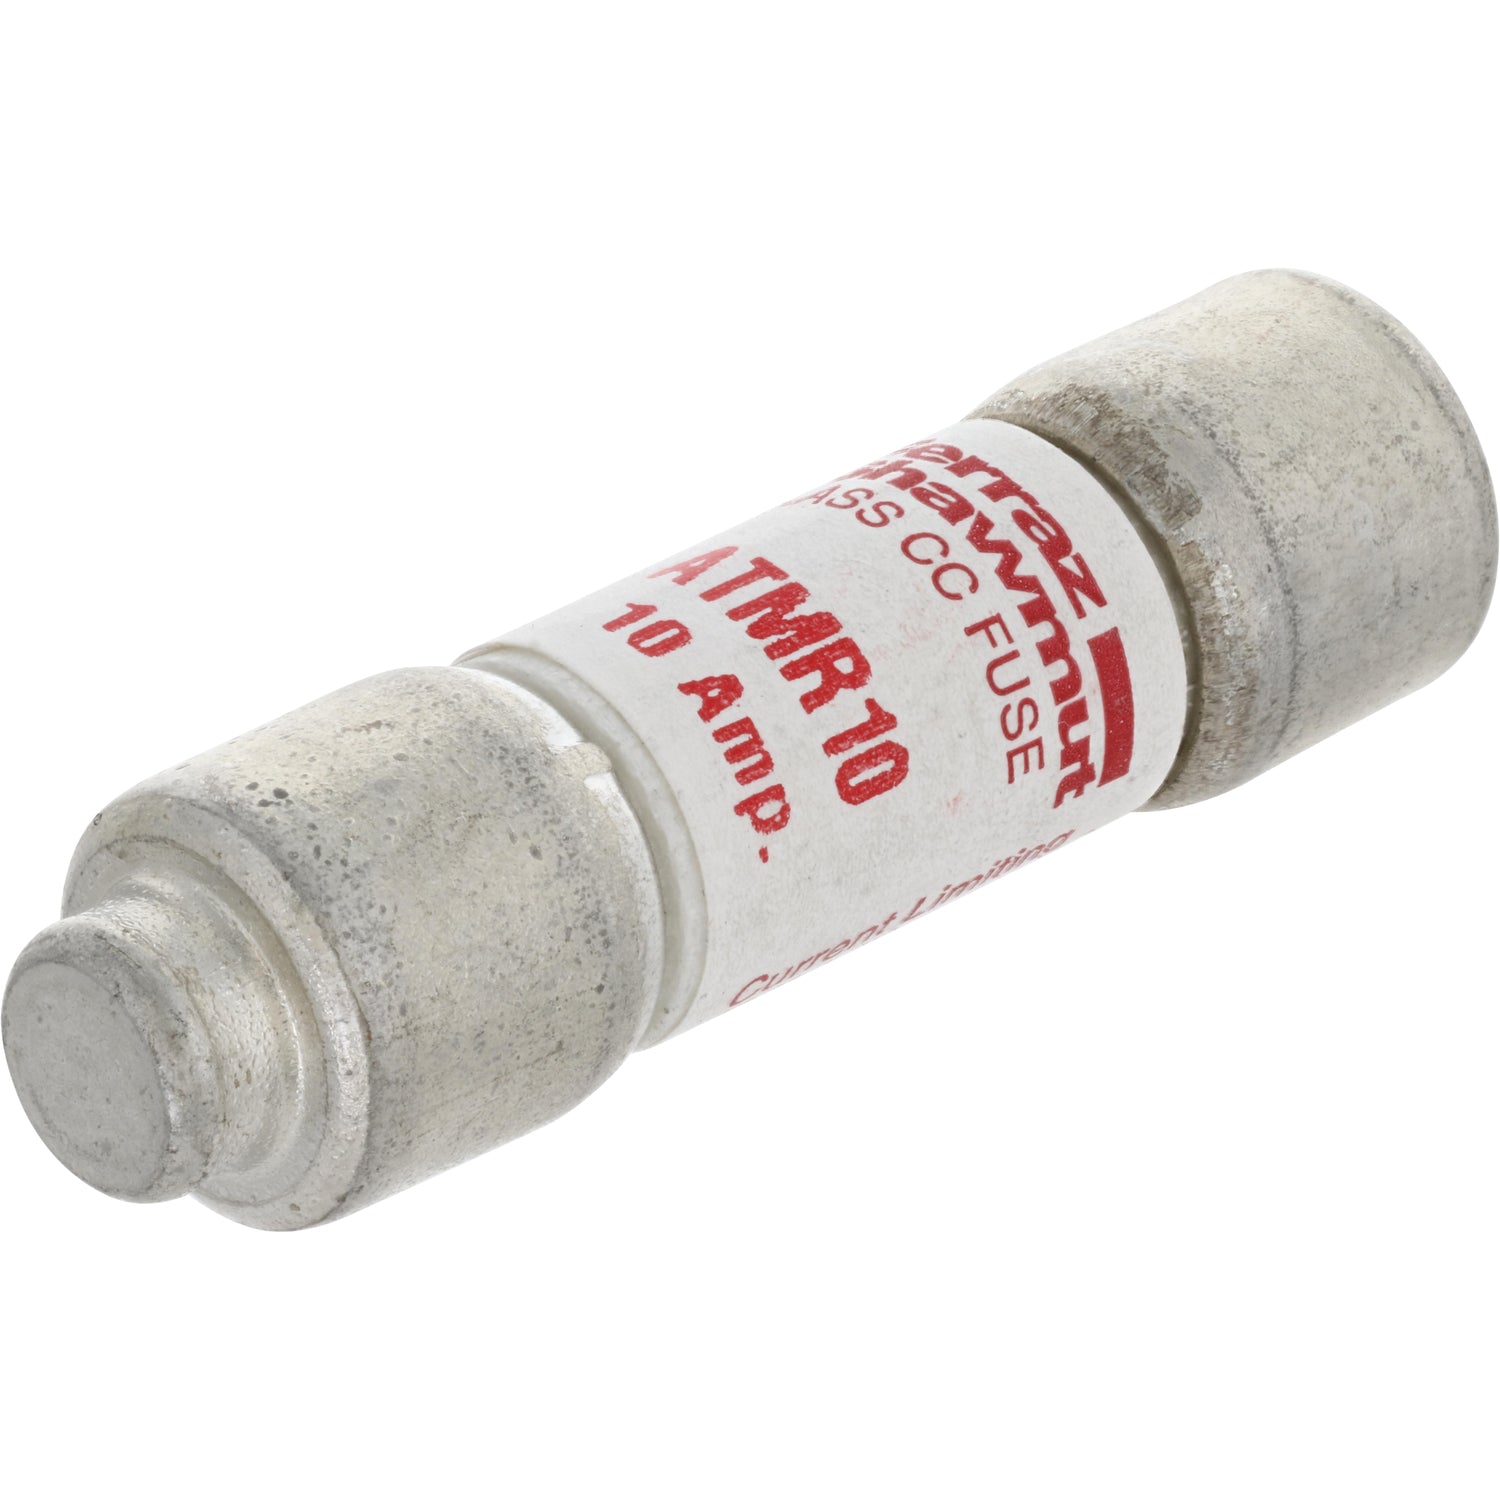 Mersen 10A Fast Acting Fuse 0.5625" x 2" shown on white background.